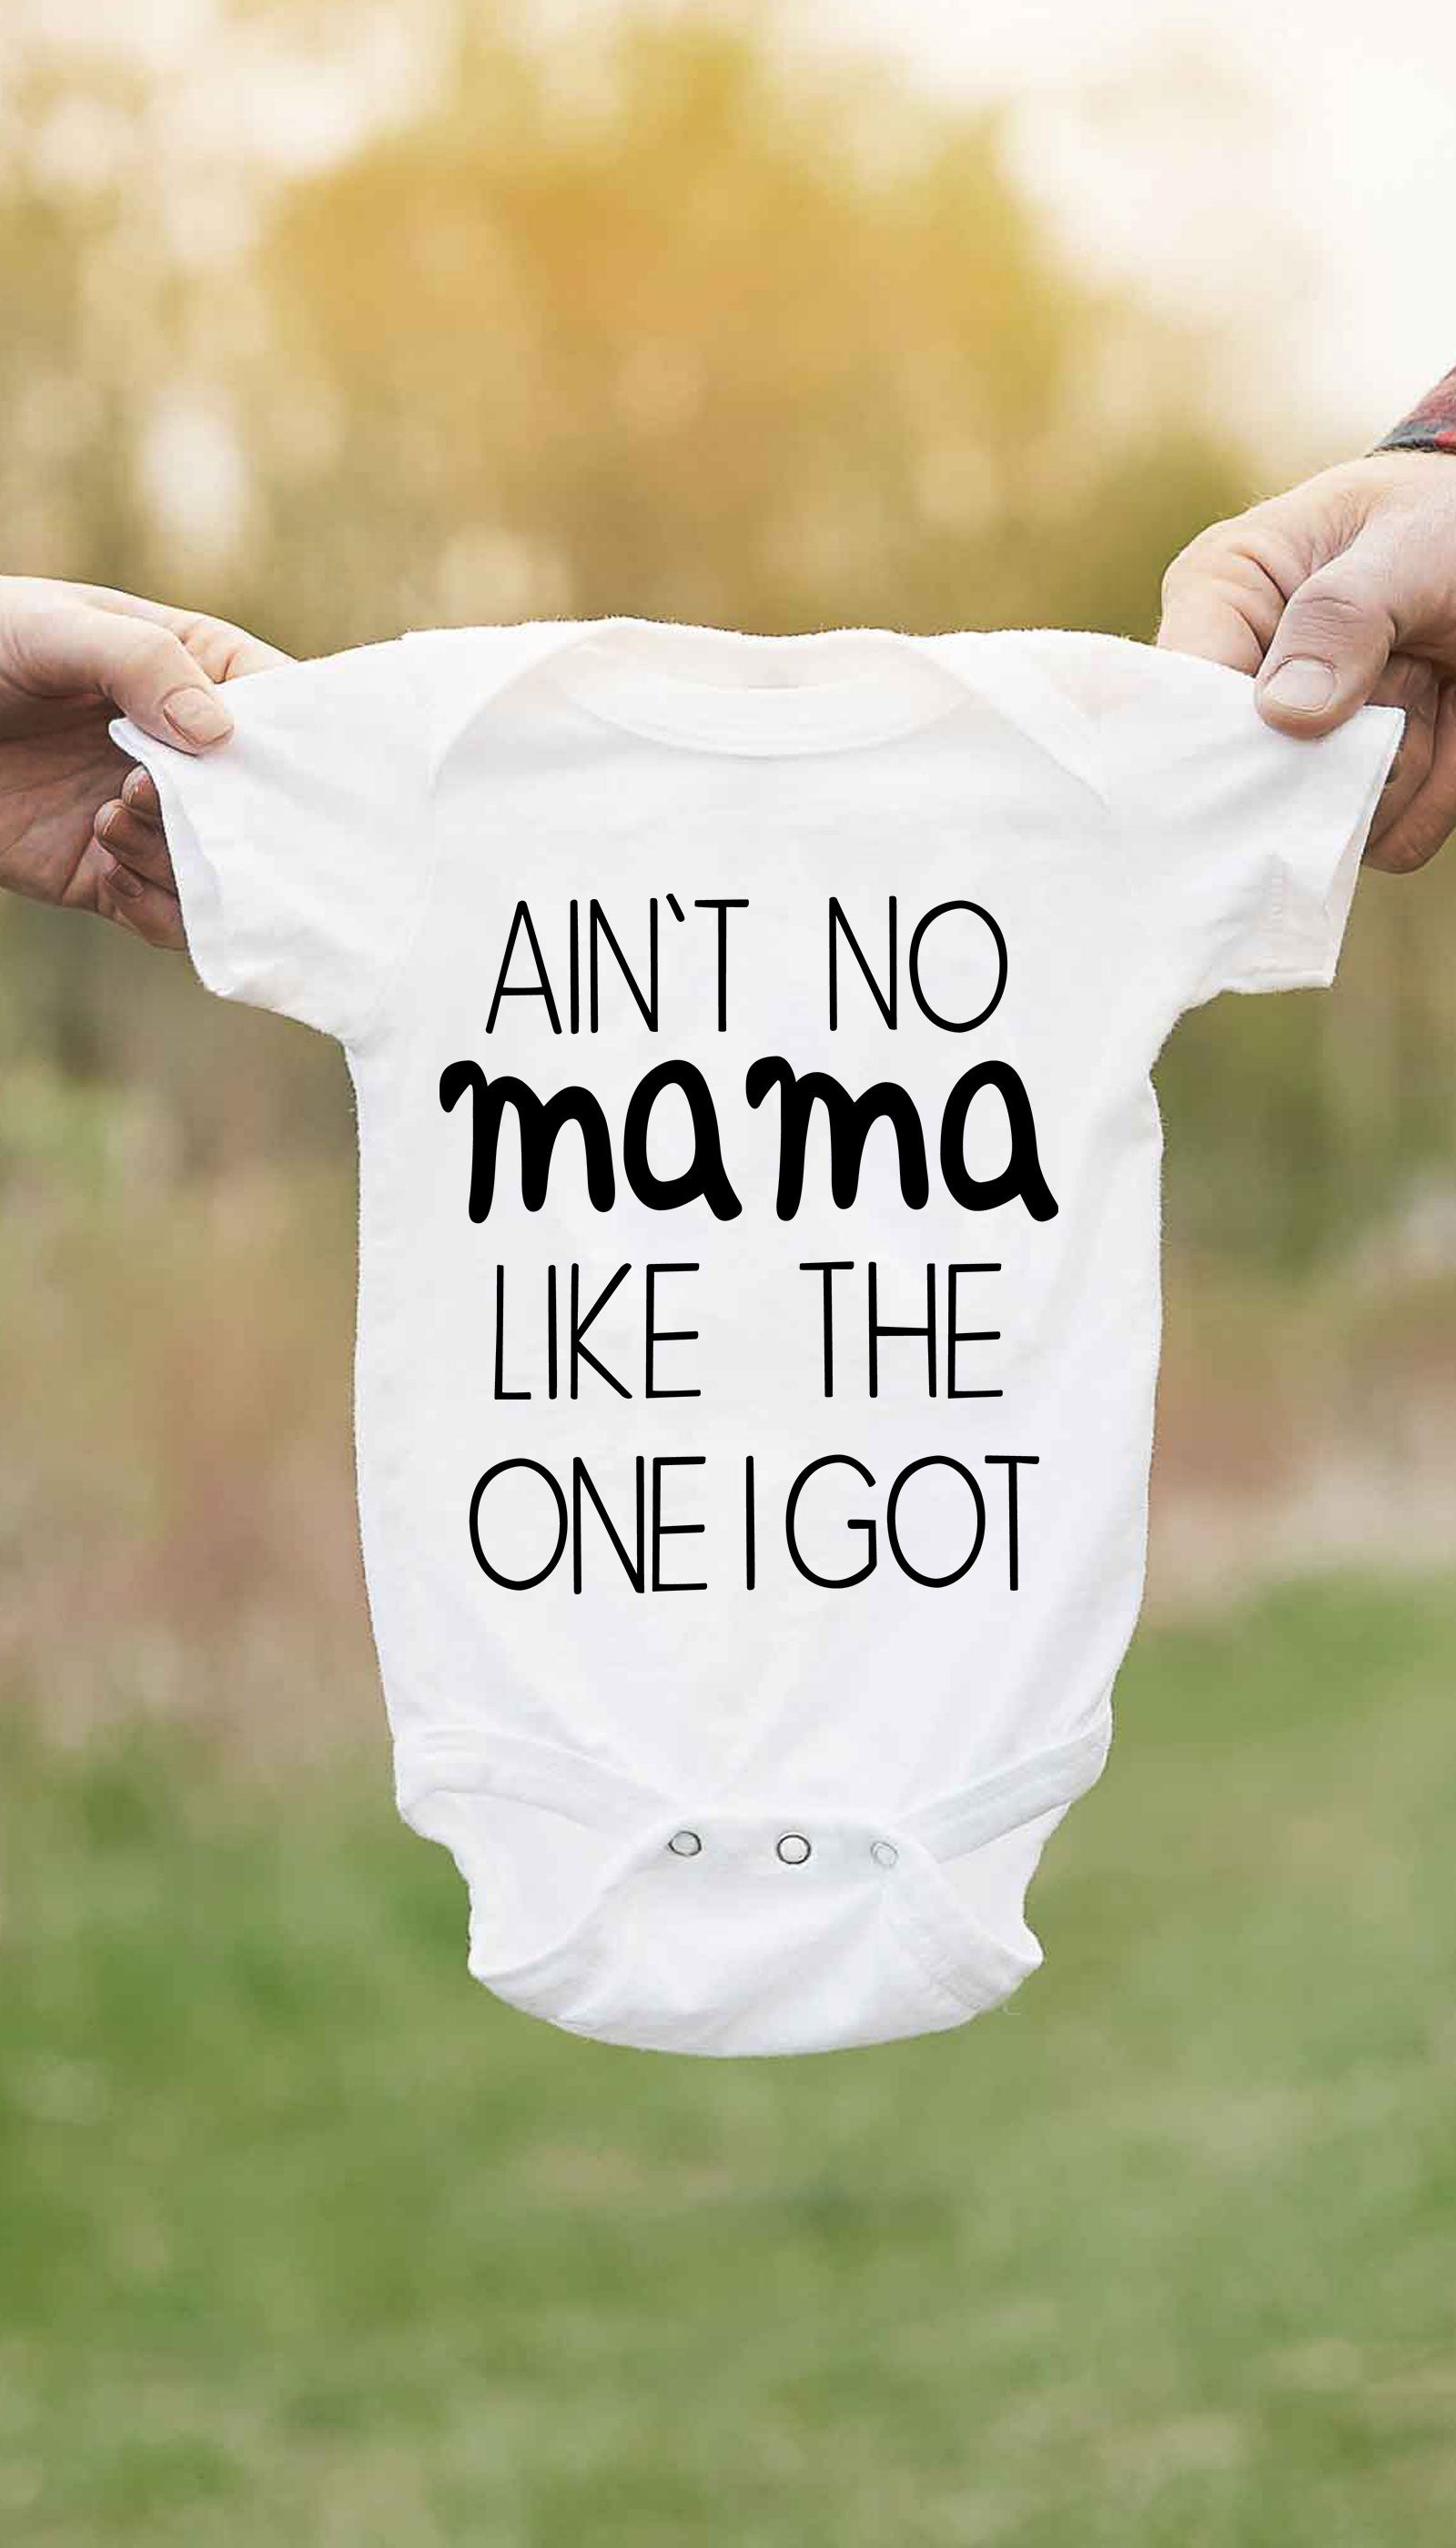 Ain't No Mama Like The One I Got Funny Baby Infant Onesie